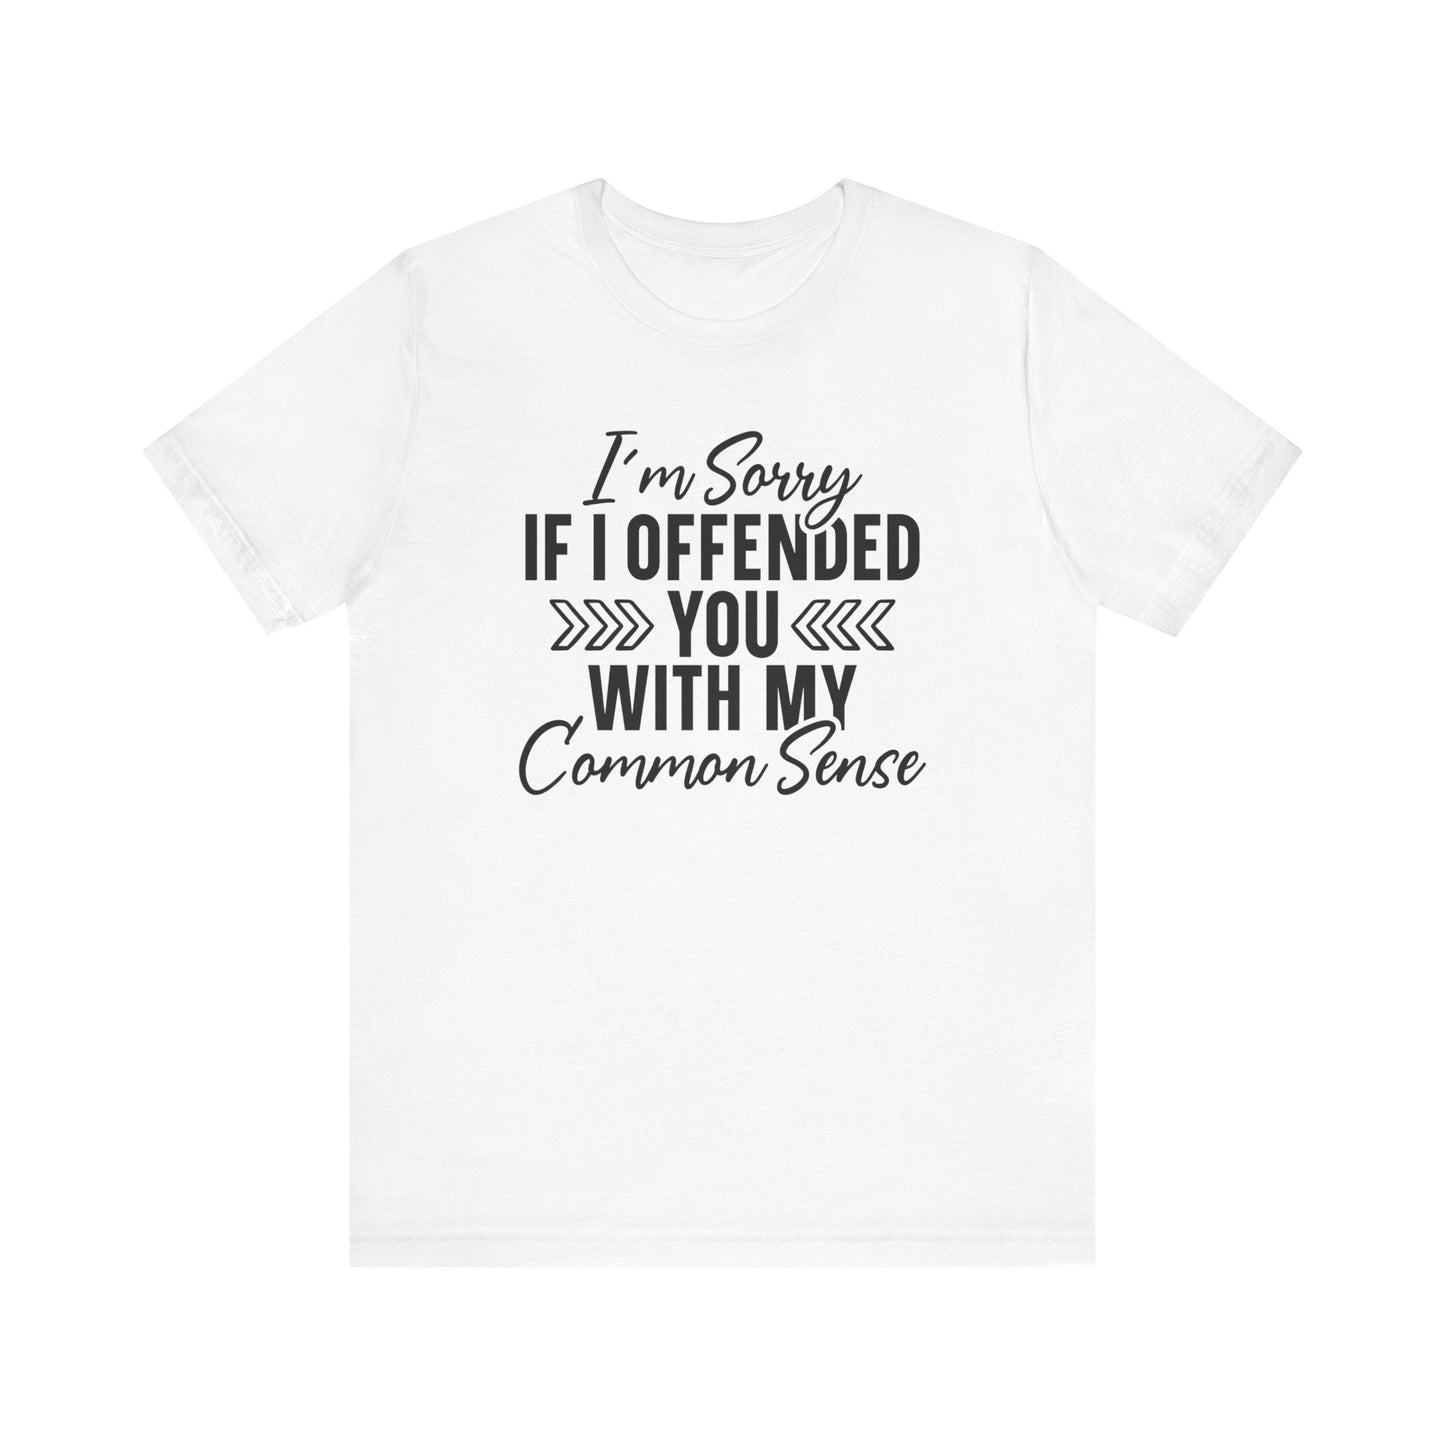 Offended T-Shirt For Sarcastic Sorry T Shirt For Common Sense TShirt